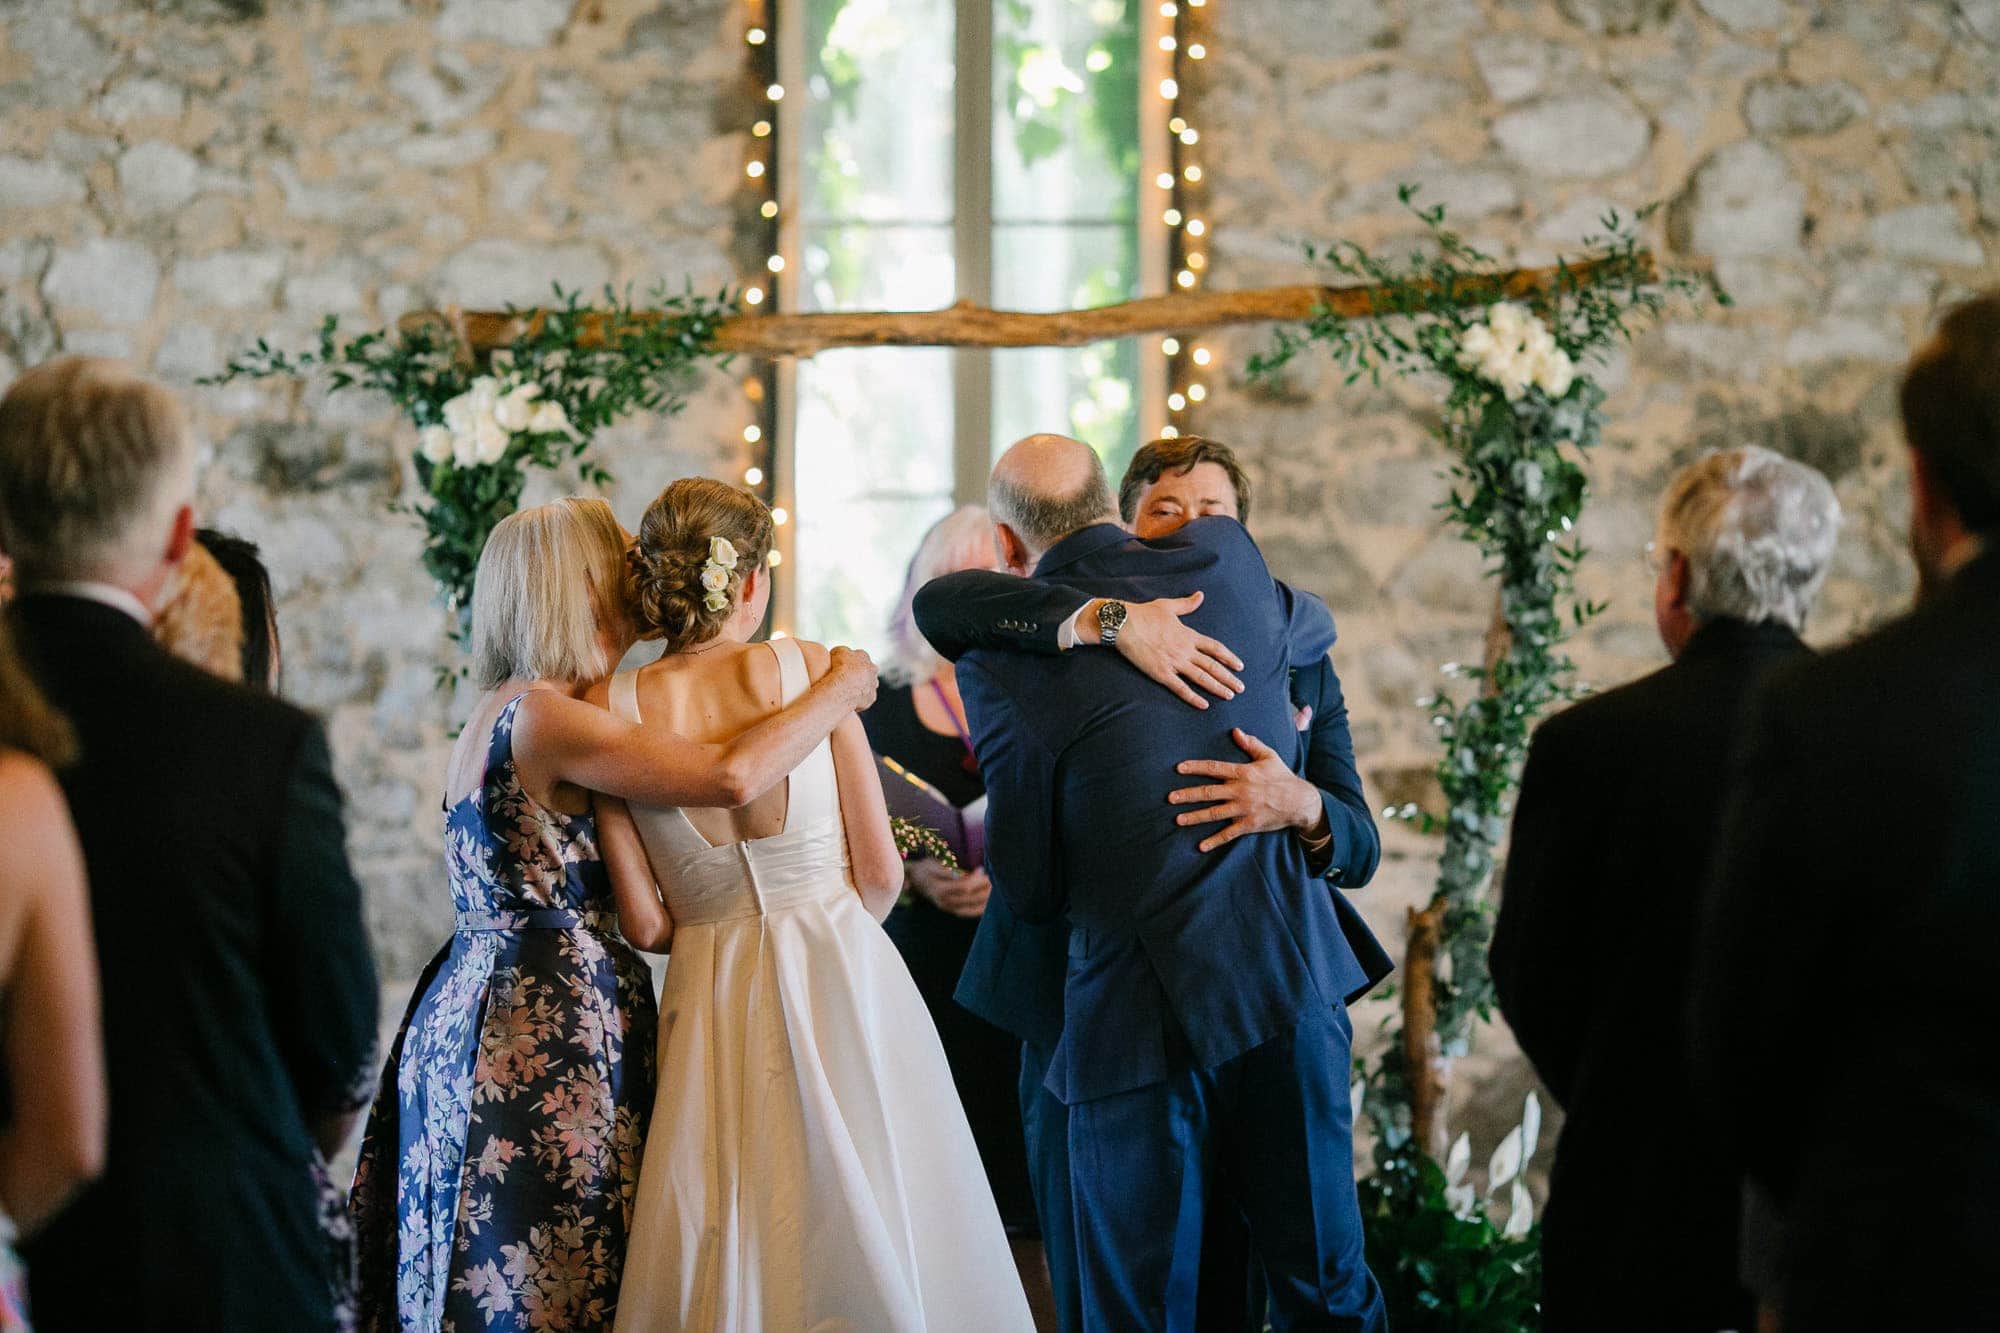 Bride and groom hugging their parents before indoor wedding ceremony in Nevada City with floral arch in background